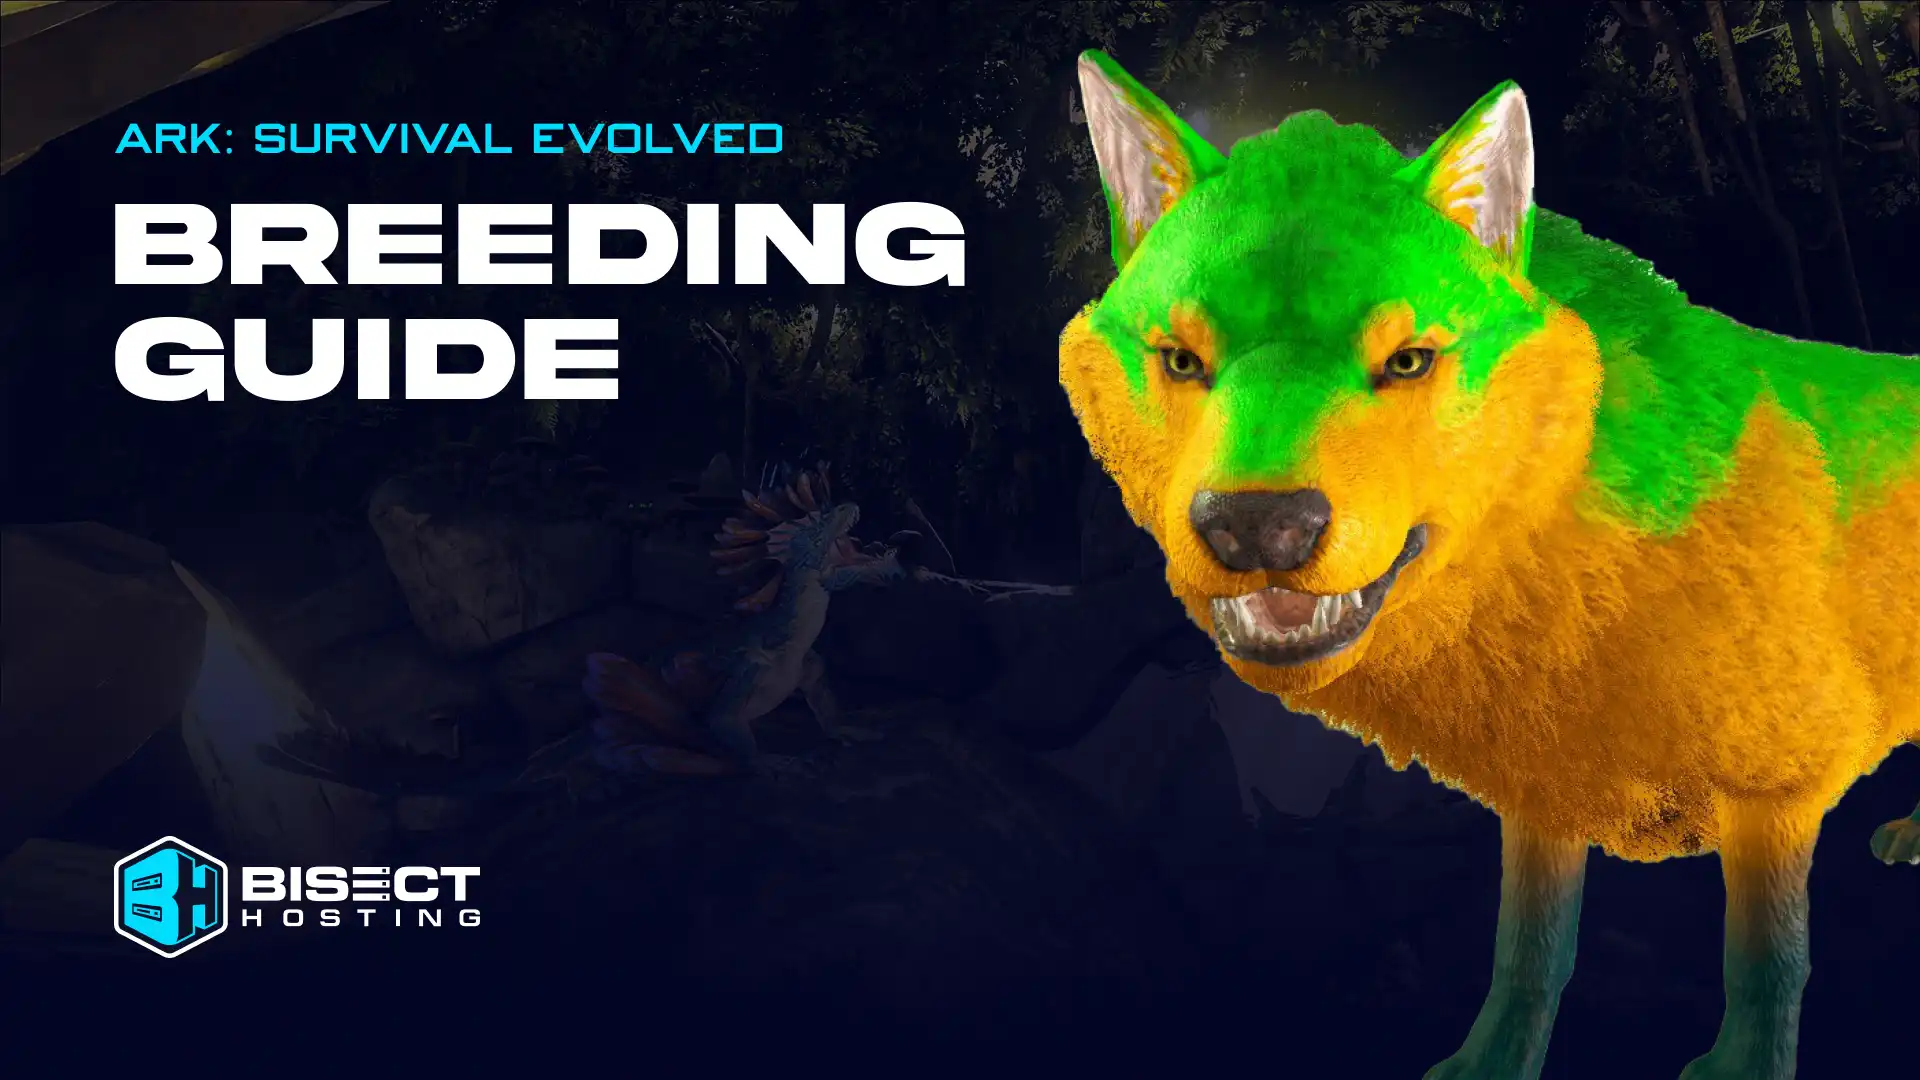 ARK: Survival Evolved Breeding Guide: Mating Requirements, Eggs, & Food Details